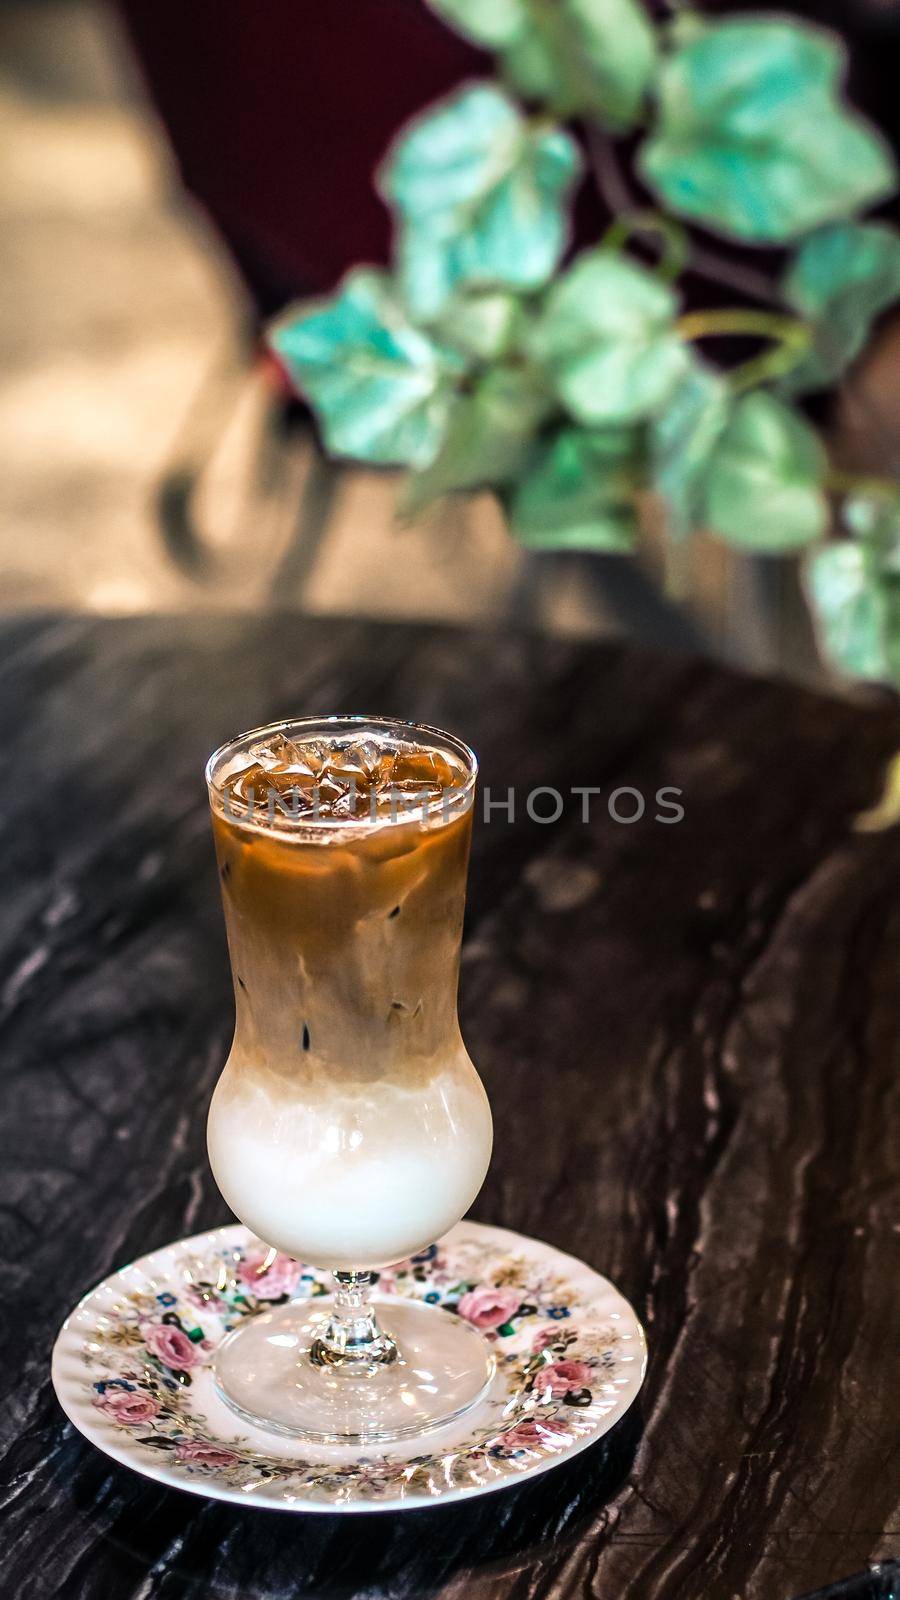 Chocolate frappe on wooden table background of Restaurant with vintage style interior